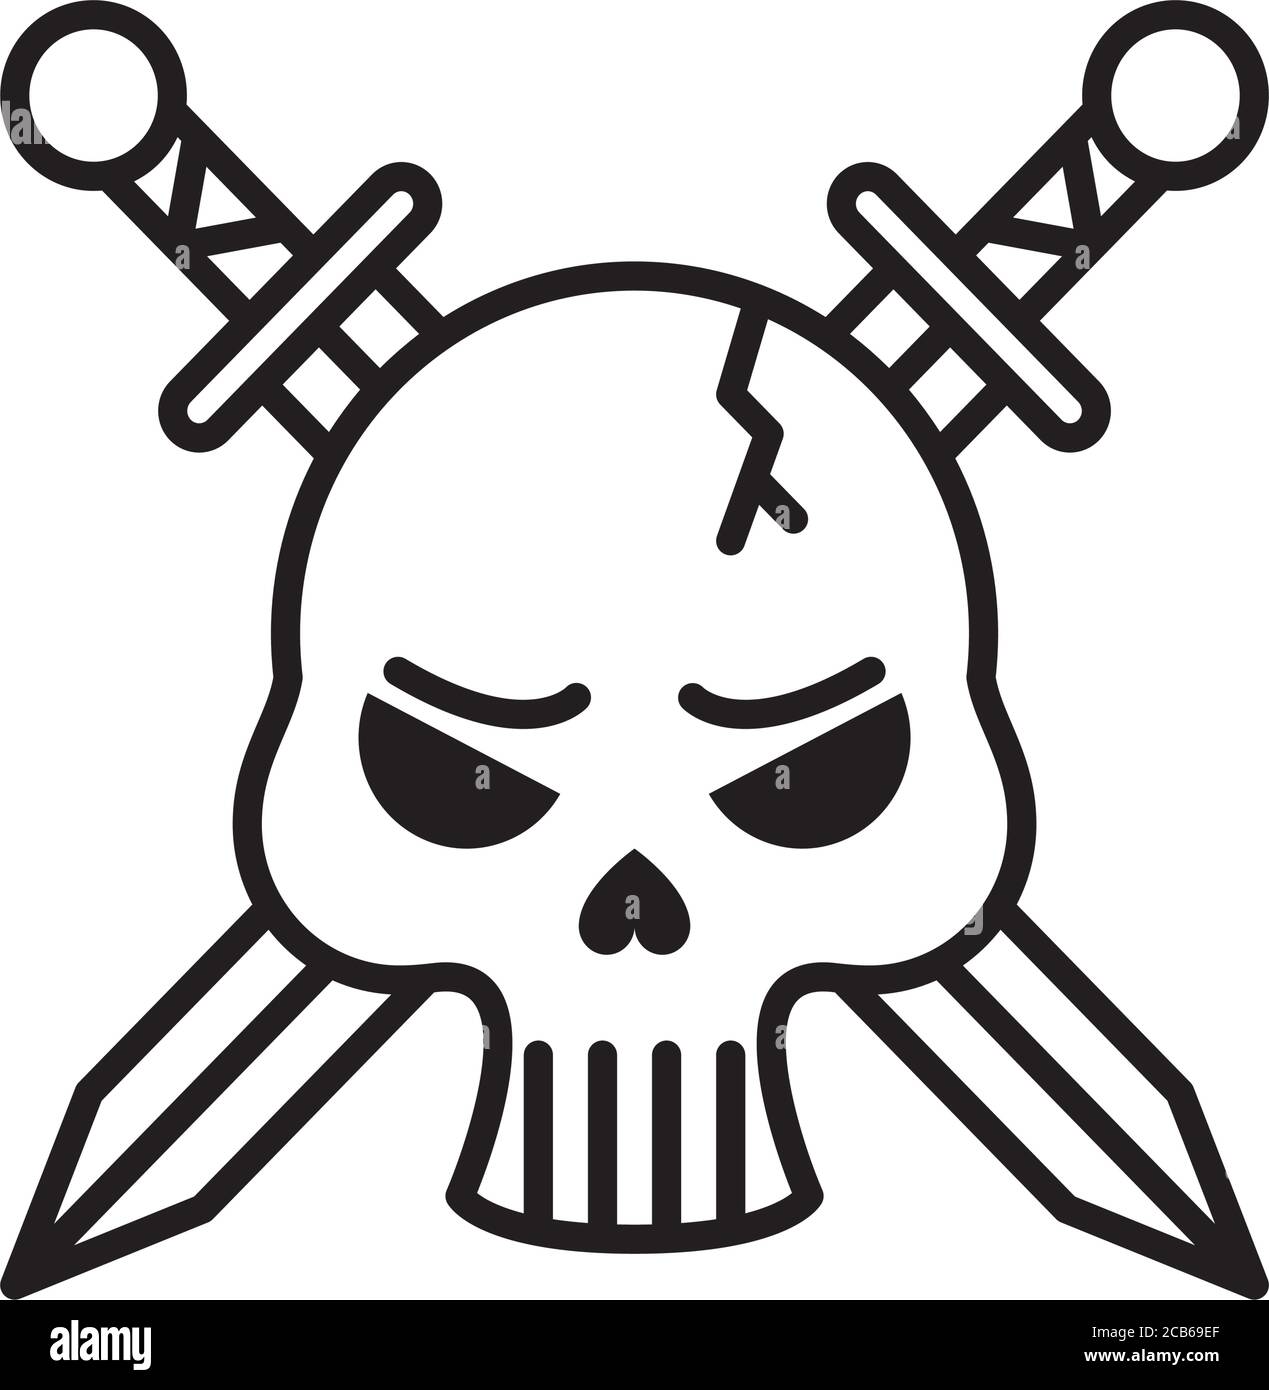 death skull head with swords crossed line style vector illustration design Stock Vector